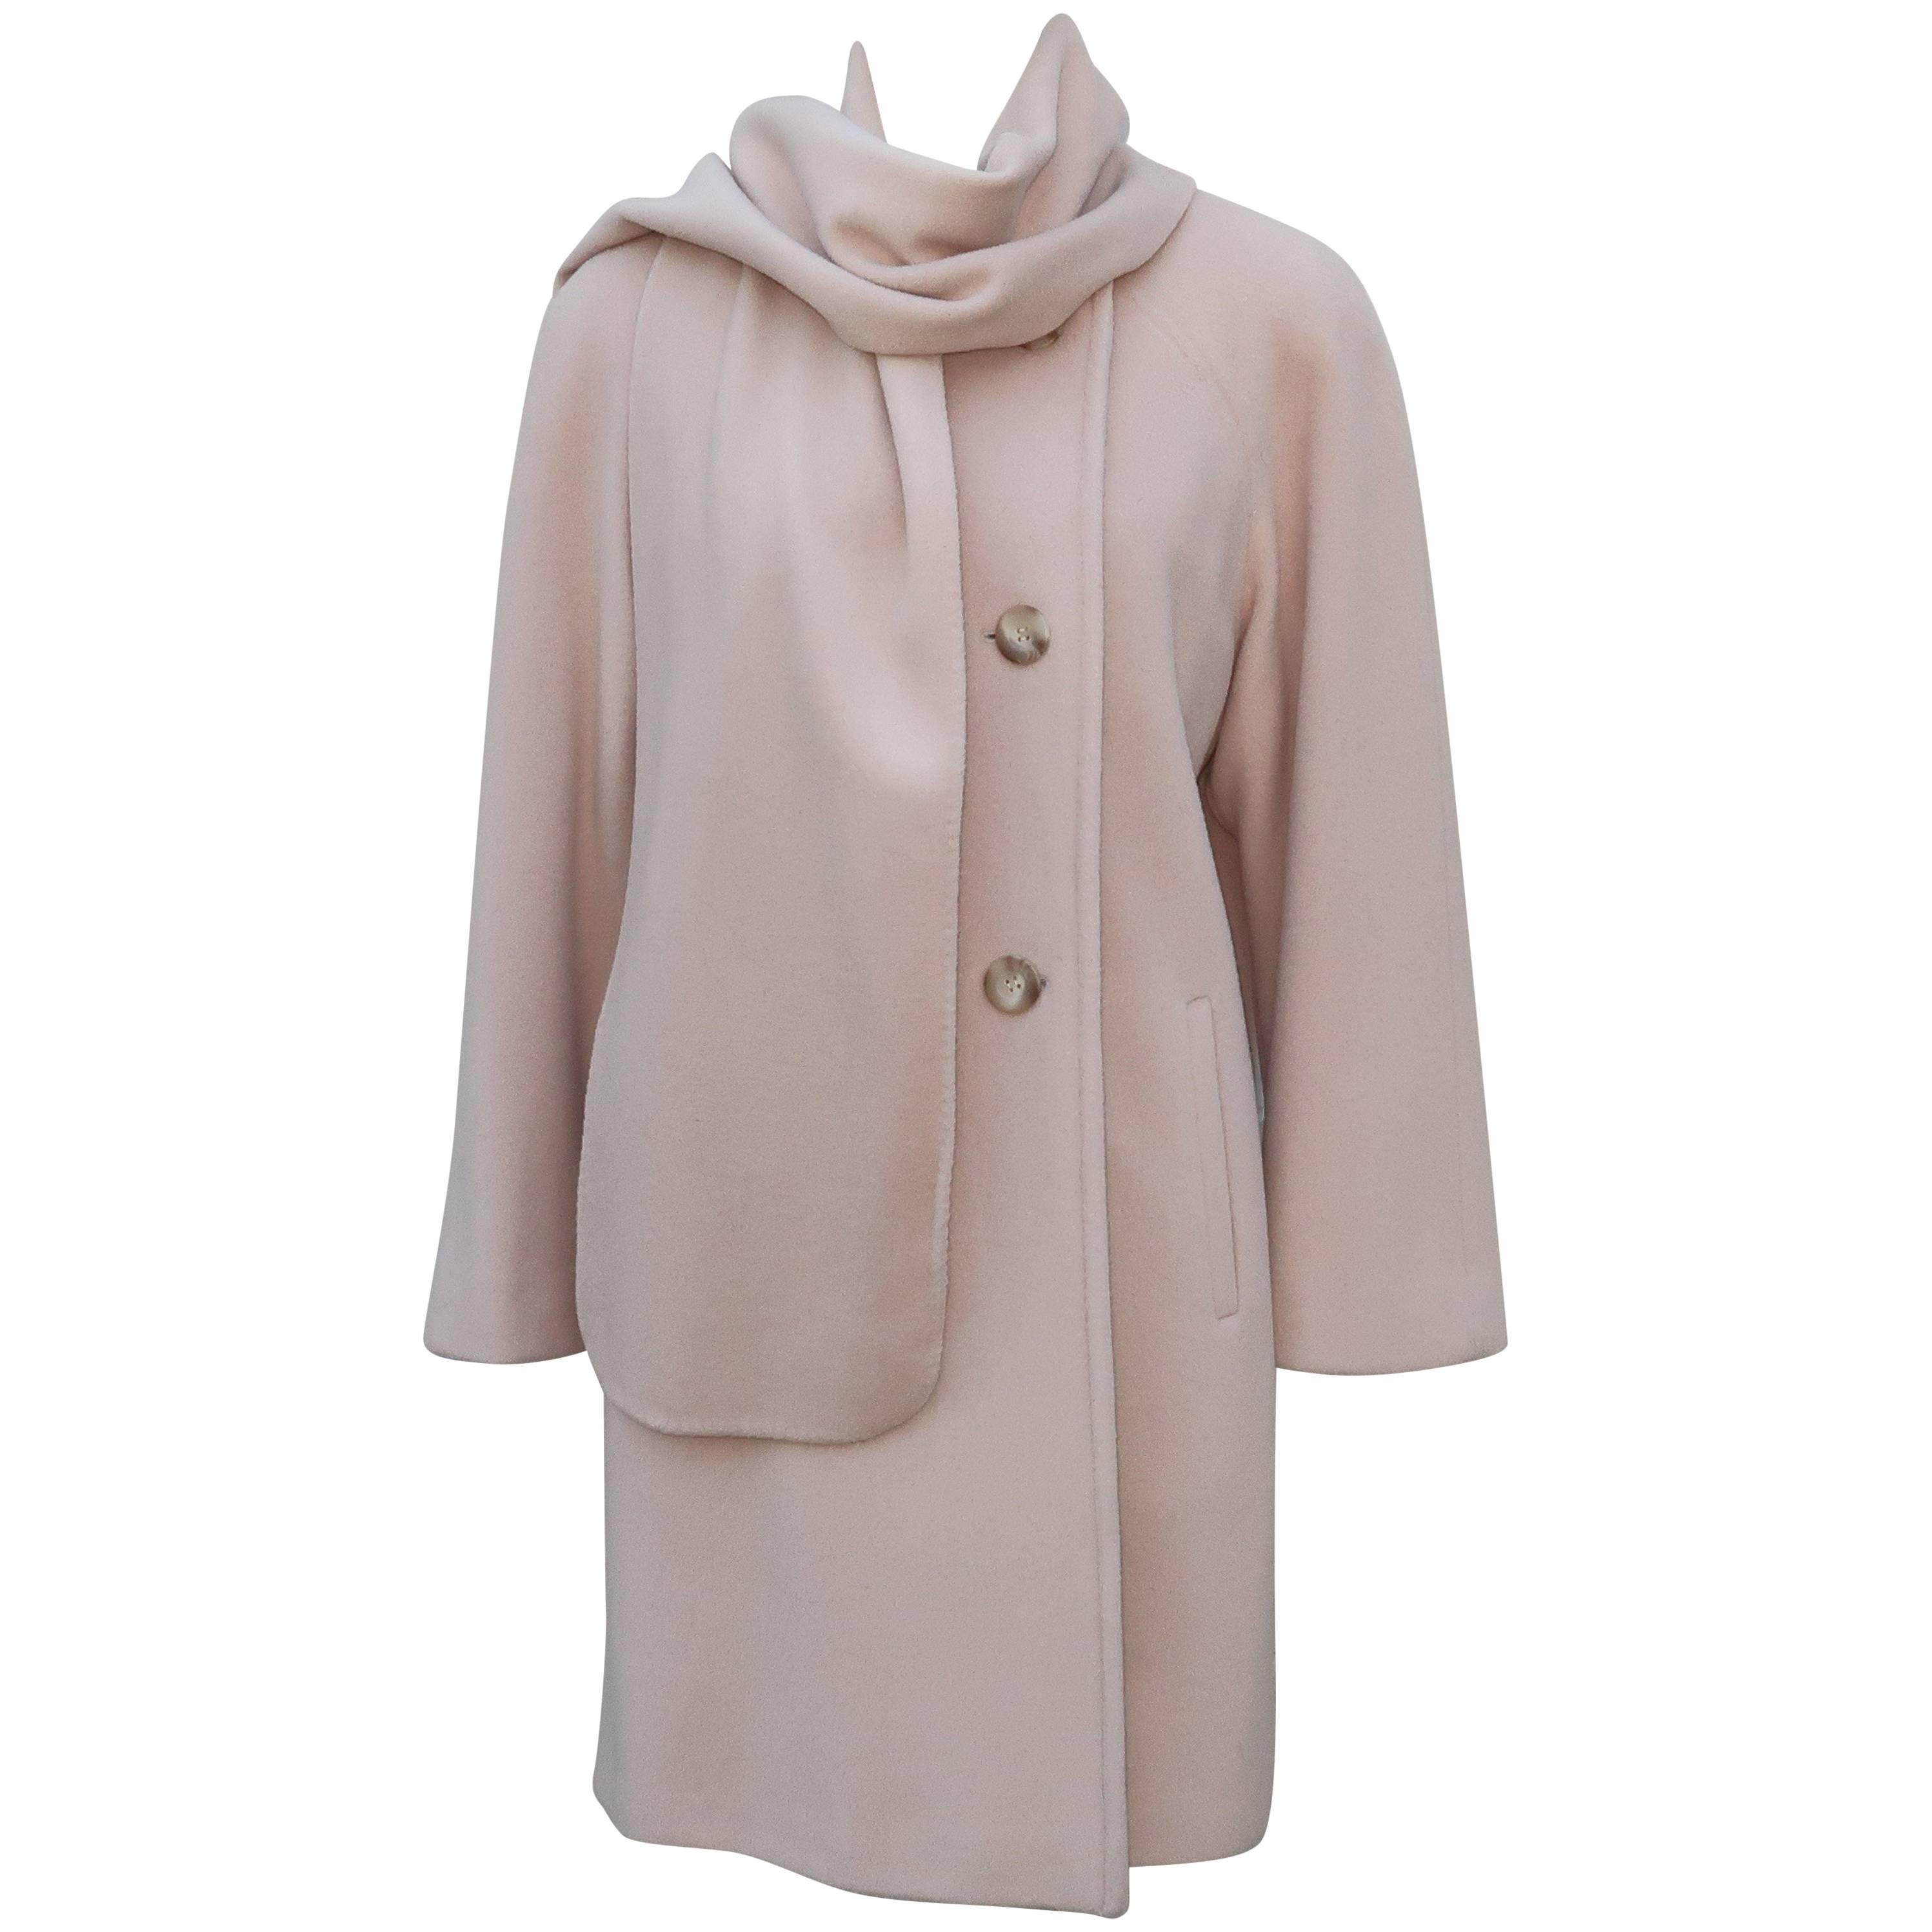 Saks Fifth Avenue Cashmere Car Coat Jacket With Built In Scarf, 1980s ...